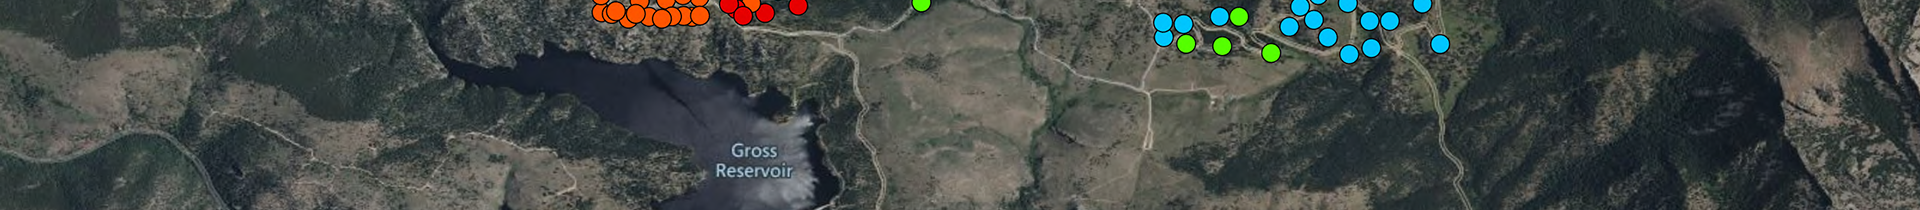 Google Earth image of land around Gross Reservoir in Boulder County, Colorado with dots indicating severity of impacts from Gross Dam Expansion Project